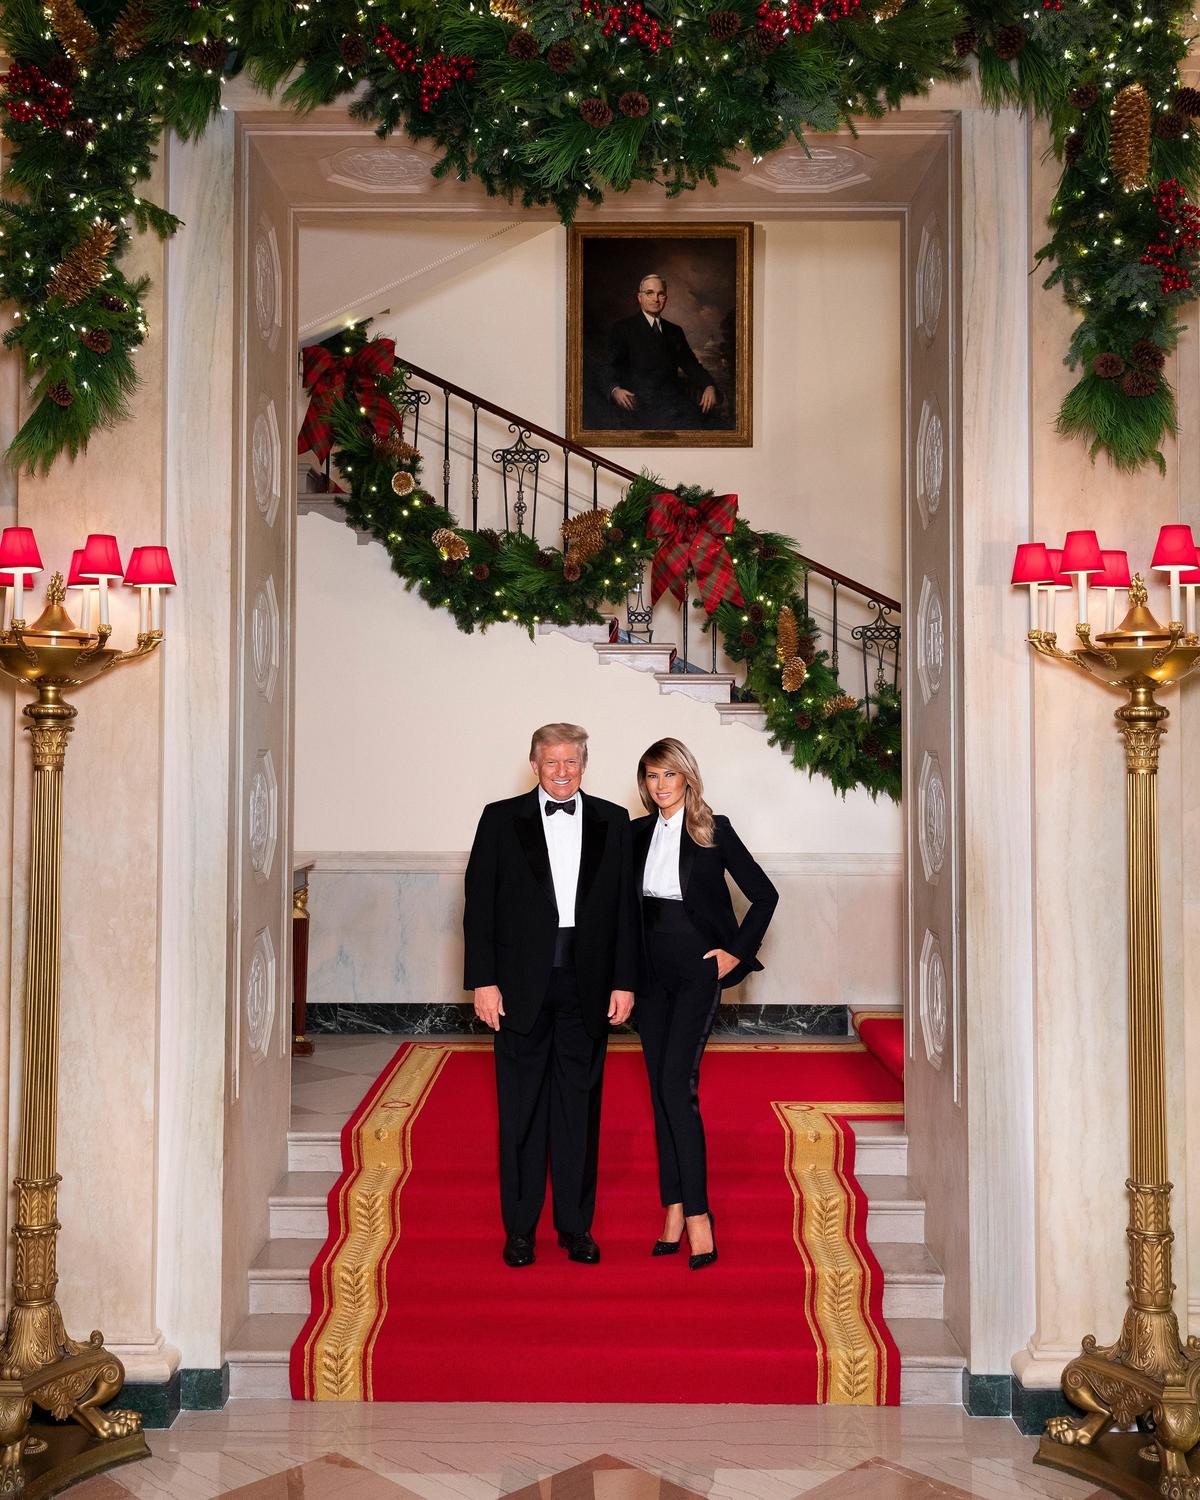 President Donald J. Trump and First Lady Melania Trump pose for their official Christmas portrait on the Grand Staircase in the Grand Foyer of the White House on Dec. 10, 2020. (Official White House Photo by Andrea Hanks)